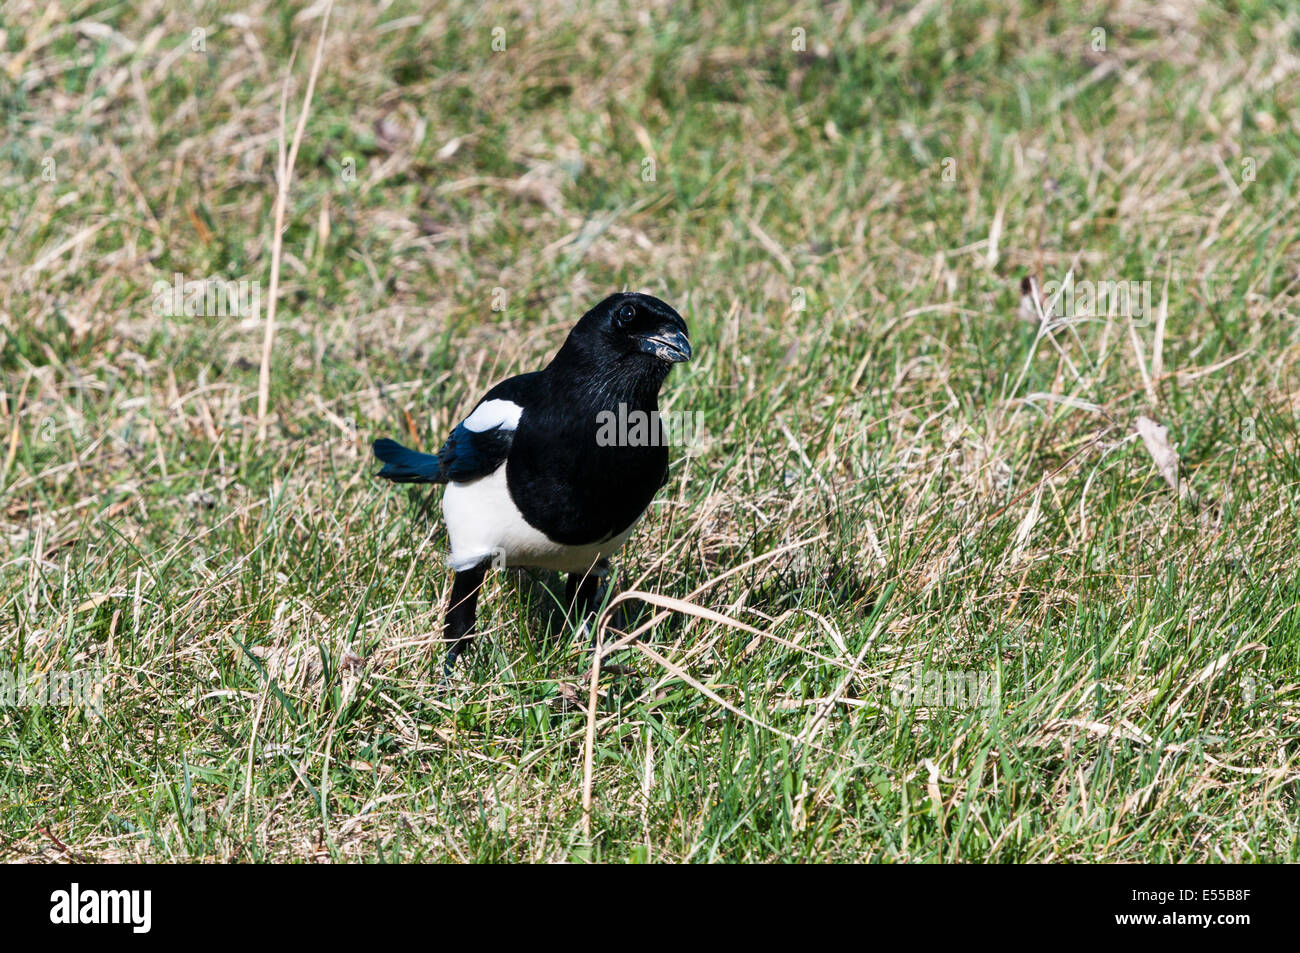 A solitary inquisitive Magpie, Pica pica, on the grass Stock Photo